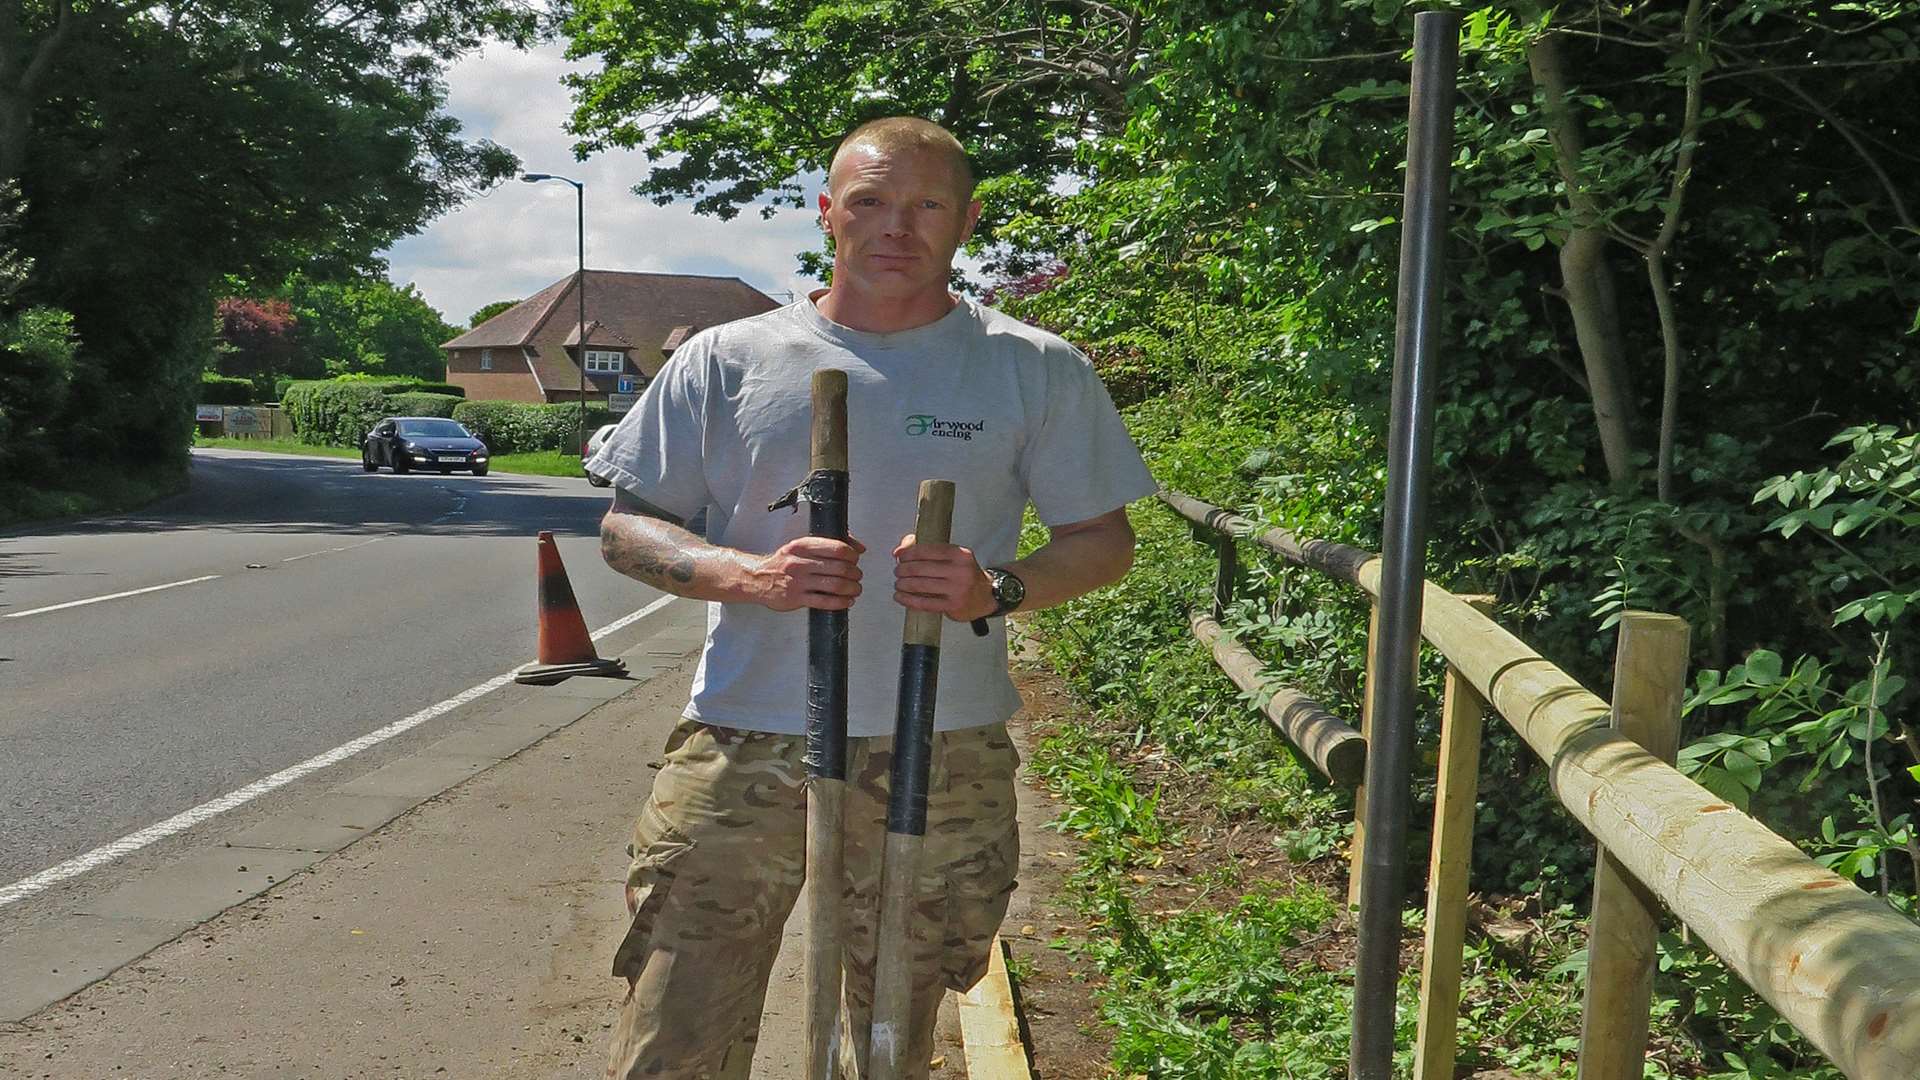 Stephen Whiting at the scene following a fatal crash in 2015